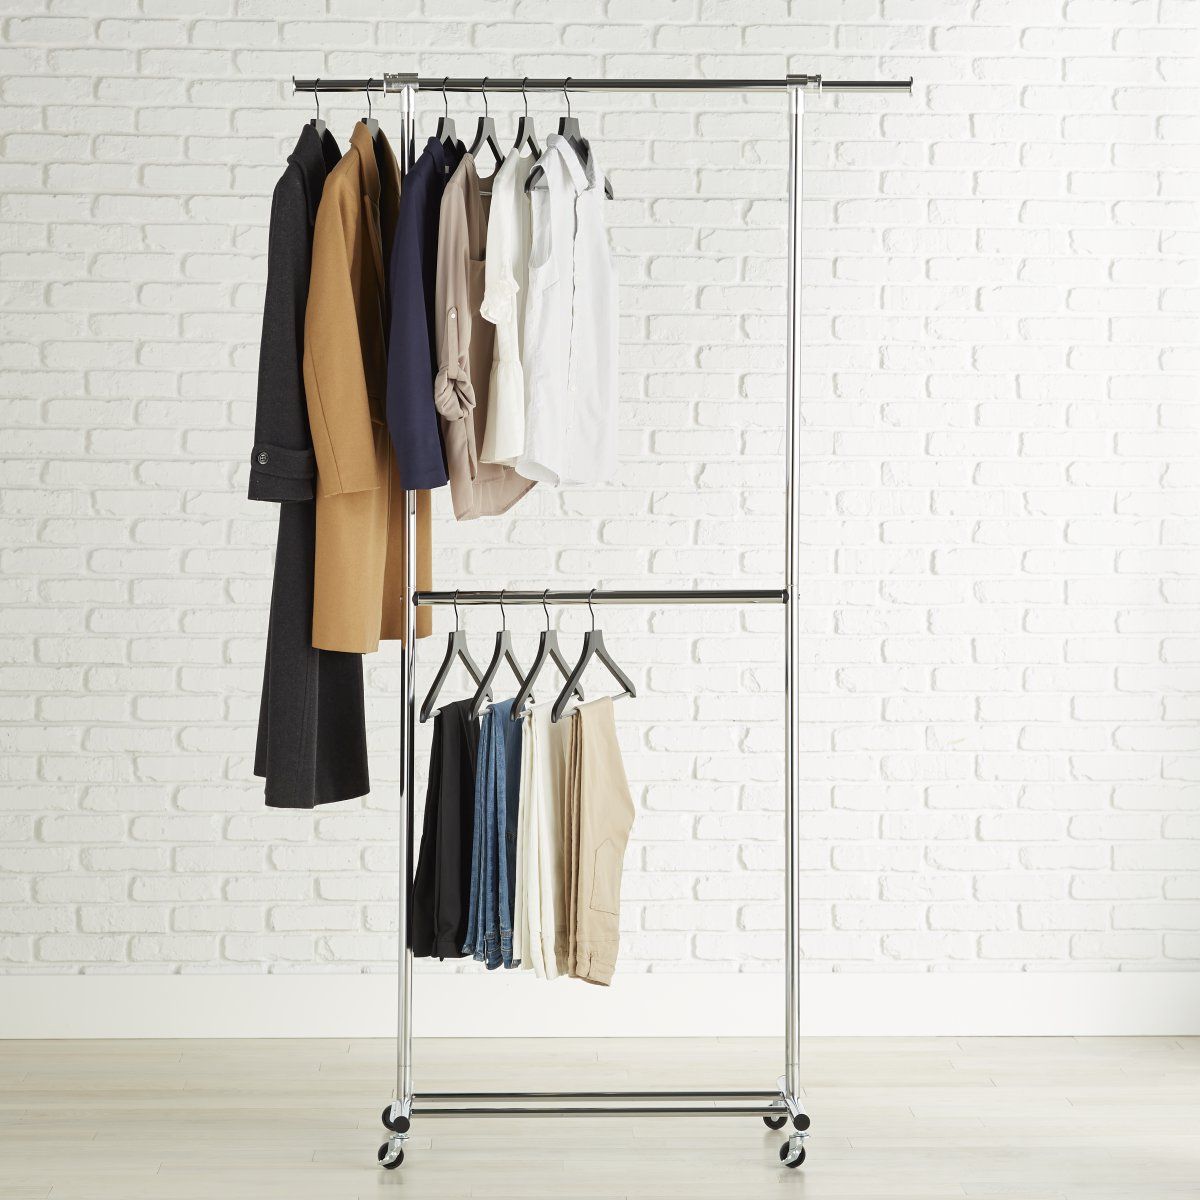 Double Hang Chrome Garment Rack | The Container Store Throughout Chrome Garment Wardrobes (Gallery 4 of 20)